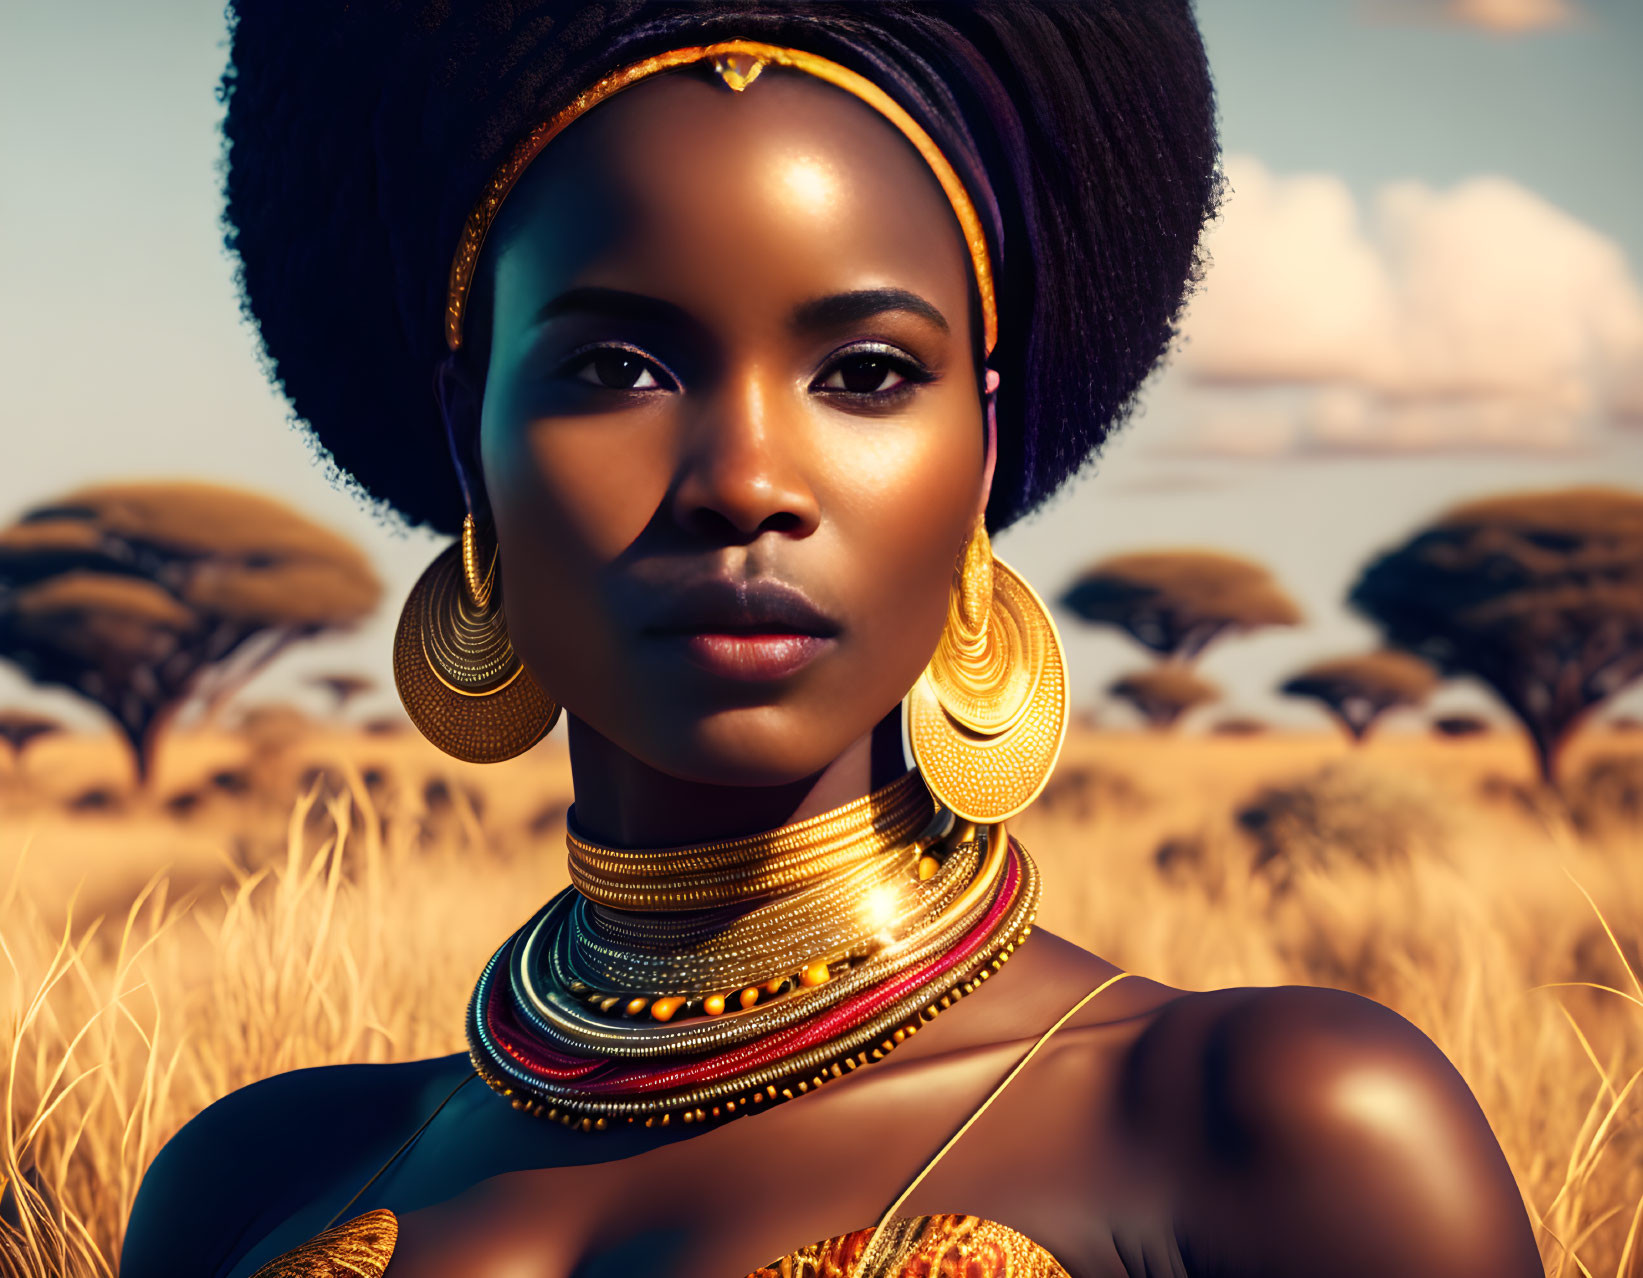 Woman in vibrant attire with golden jewelry standing in sunlit savanna